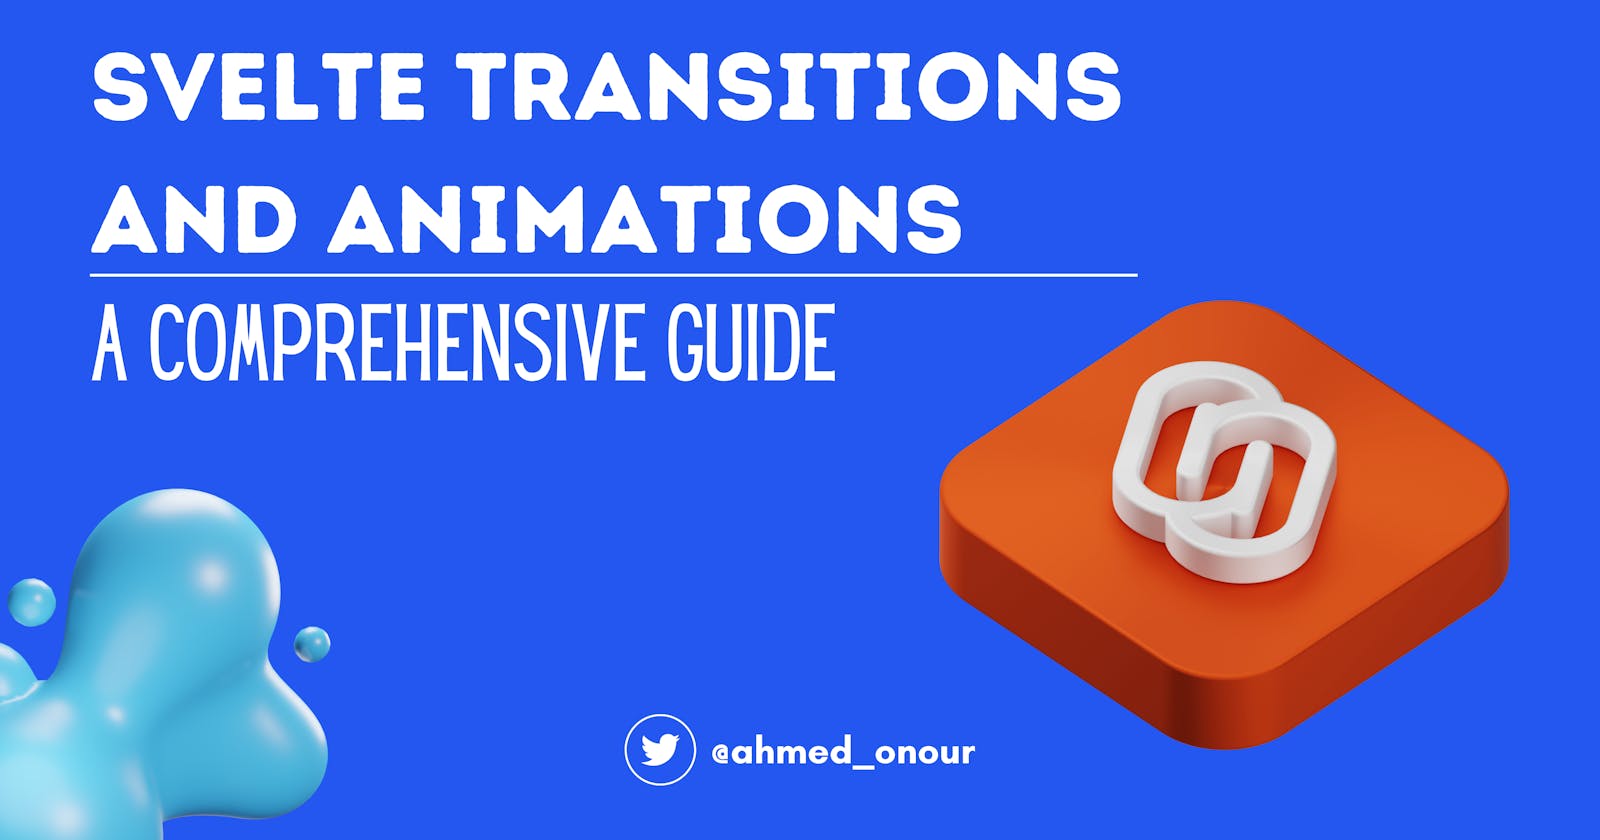 Svelte Transitions and Animations: A Comprehensive Guide